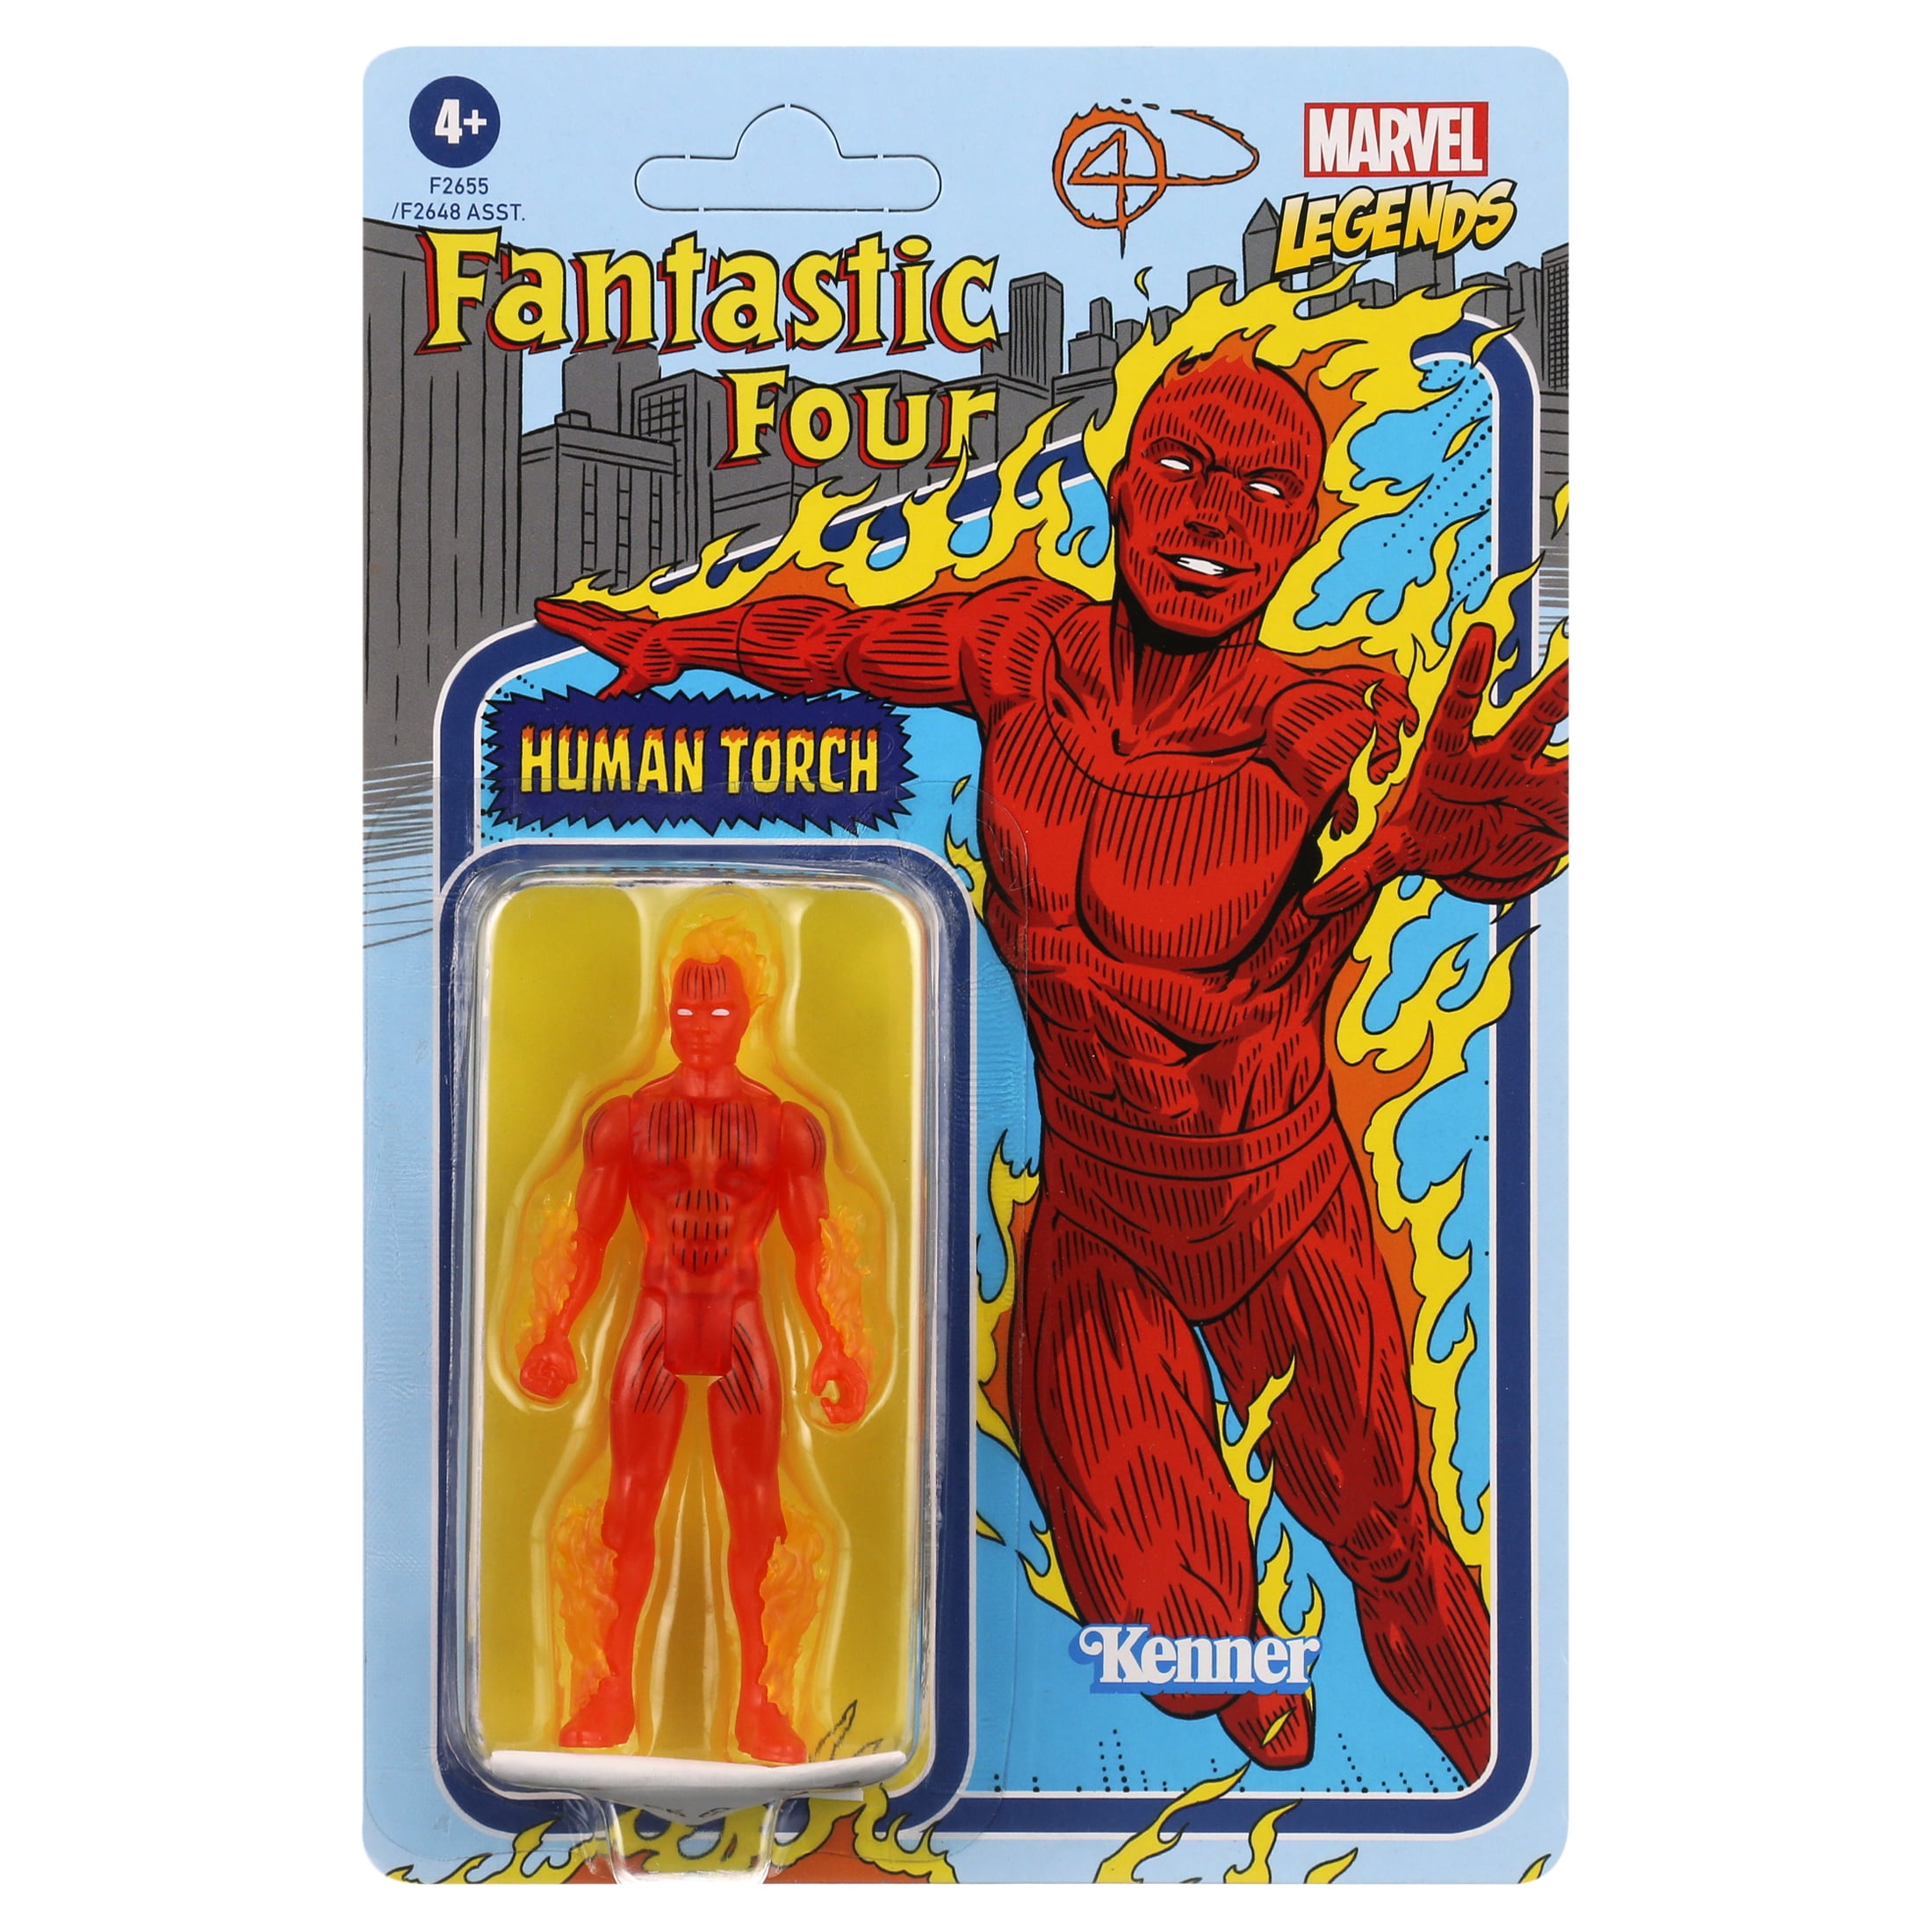 Marvel Human Torch 3.75 in Action Figure Toy F2655 for sale online 